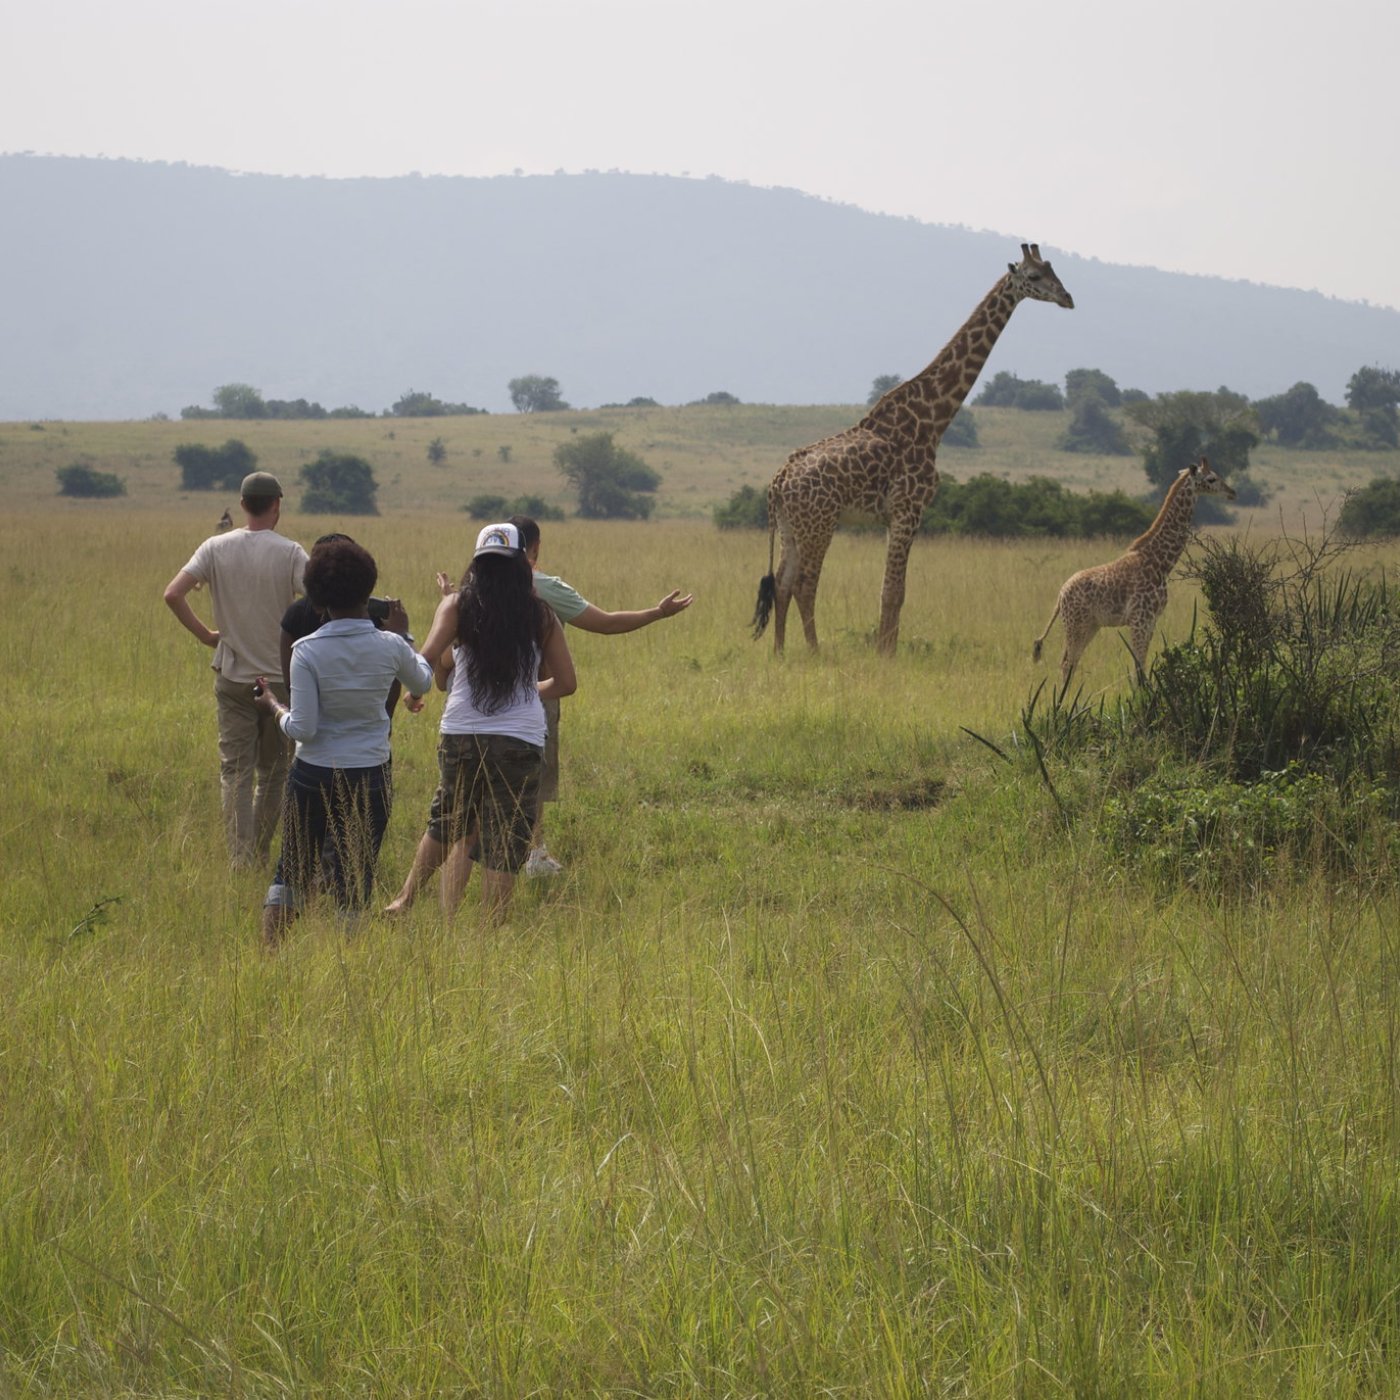 Five SMC students stand and watch an adult and baby giraffe in Rwanda